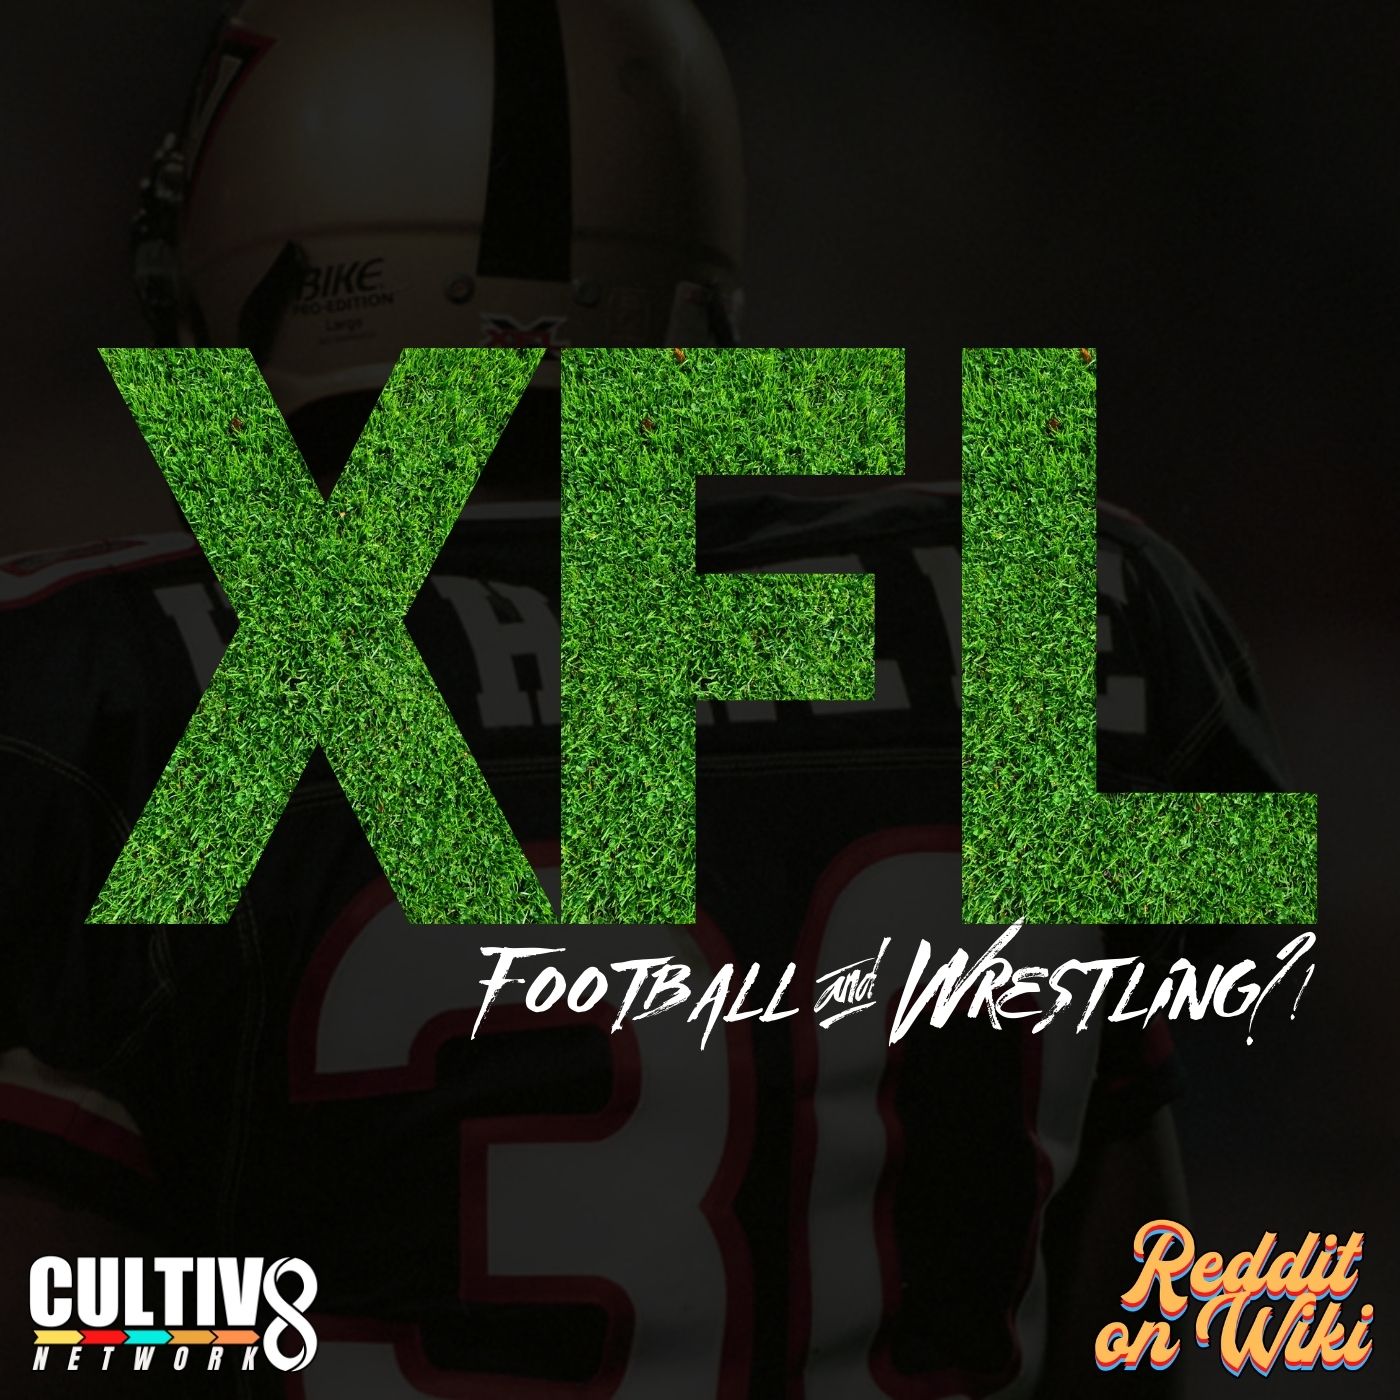 XFL | Football and Wrestling?!